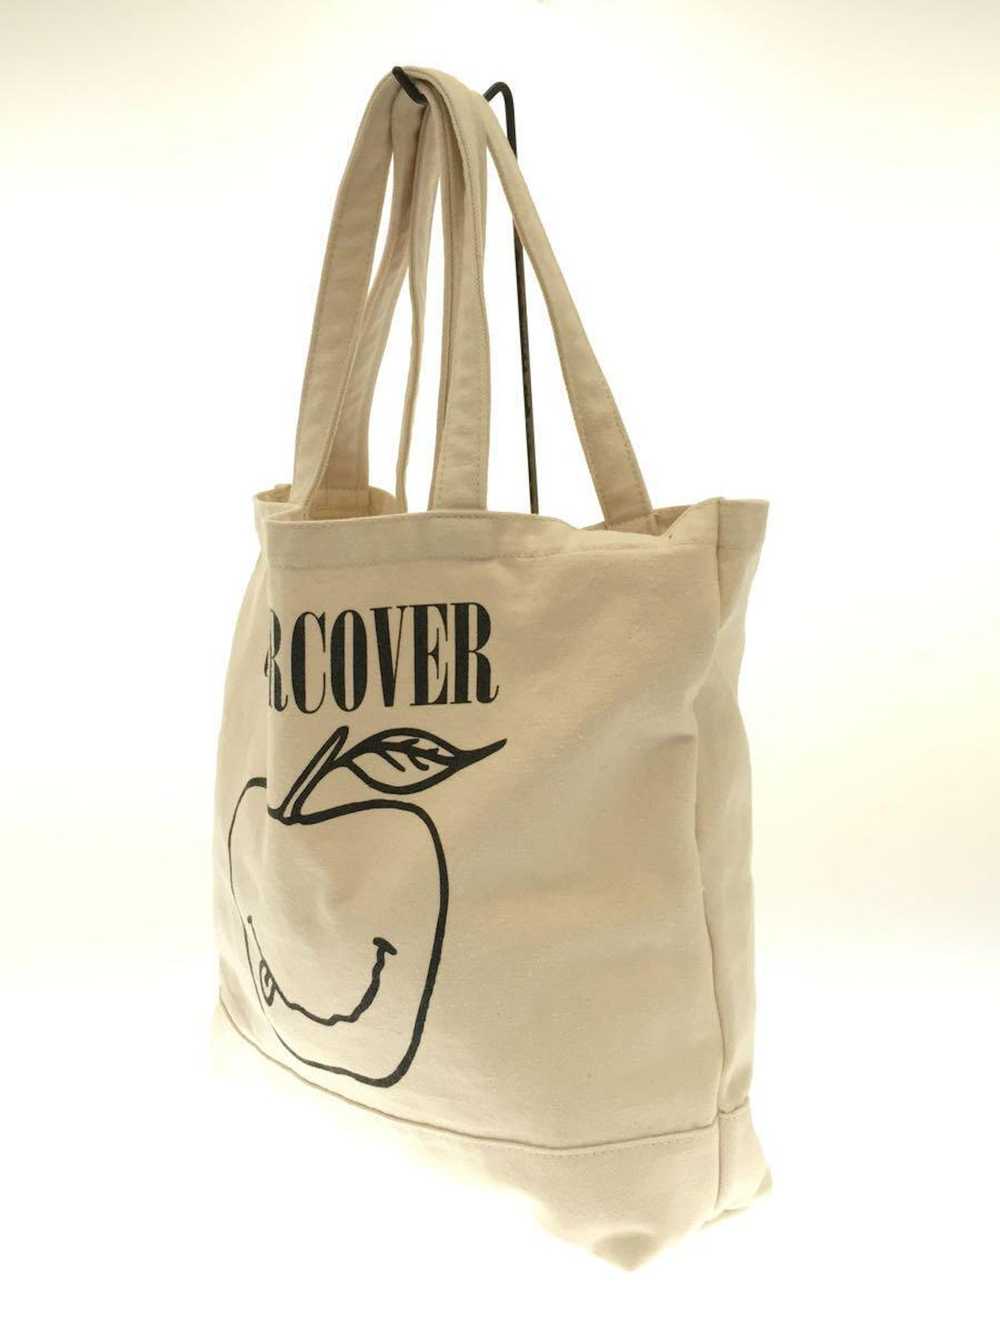 Undercover Smiley Apple Tote Bag - image 2